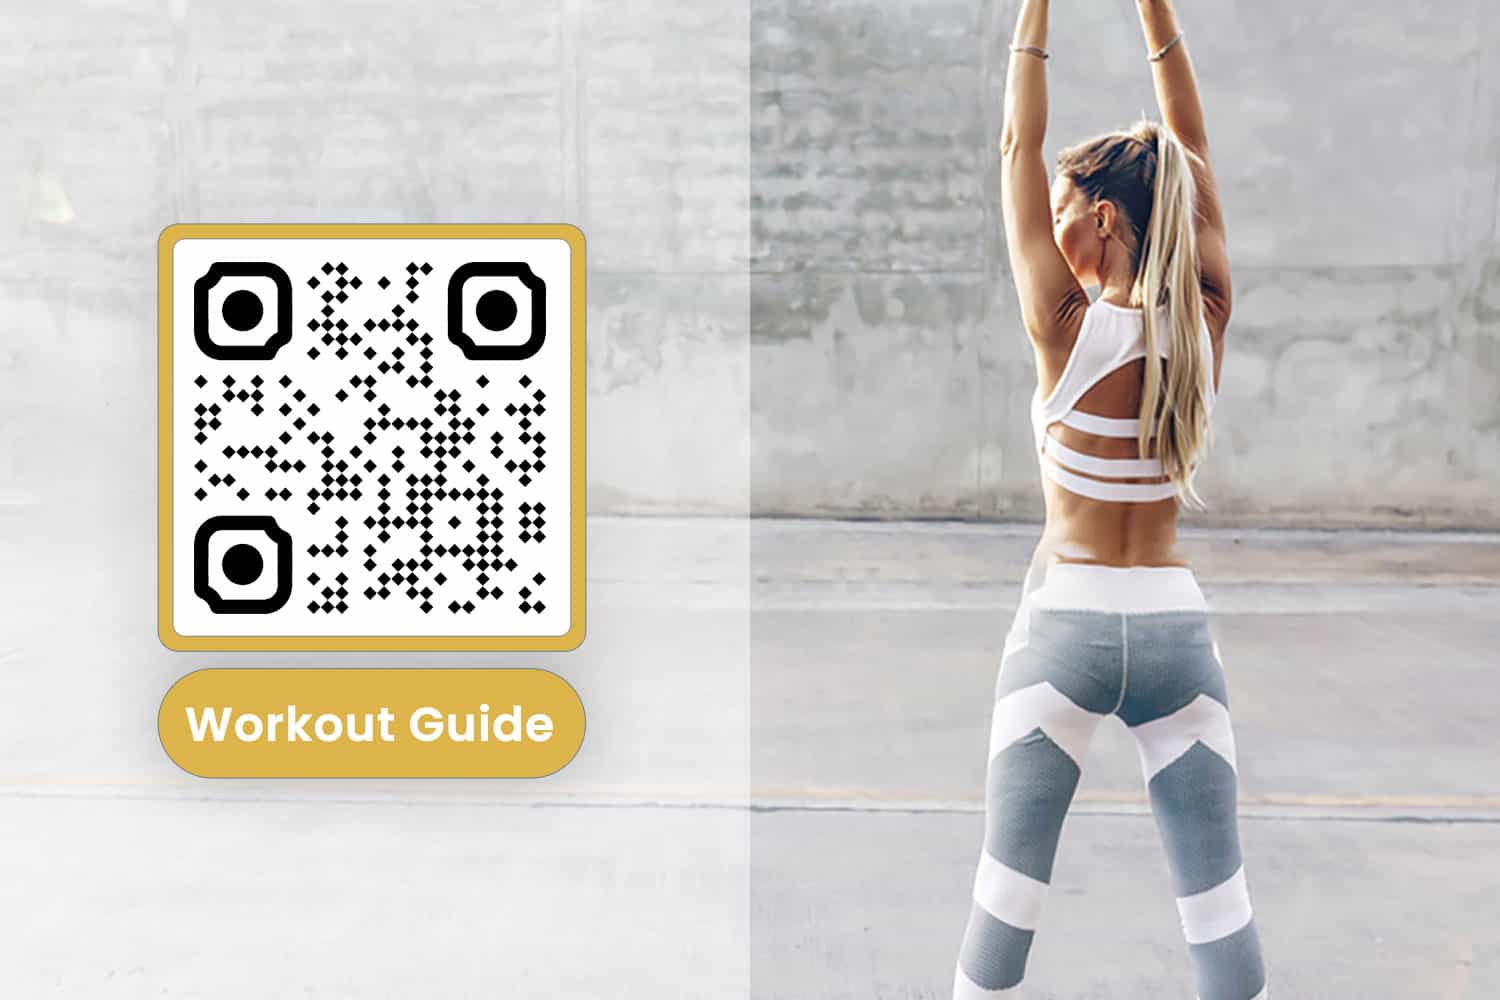 Criar o QR Code for Fitness Industry Content